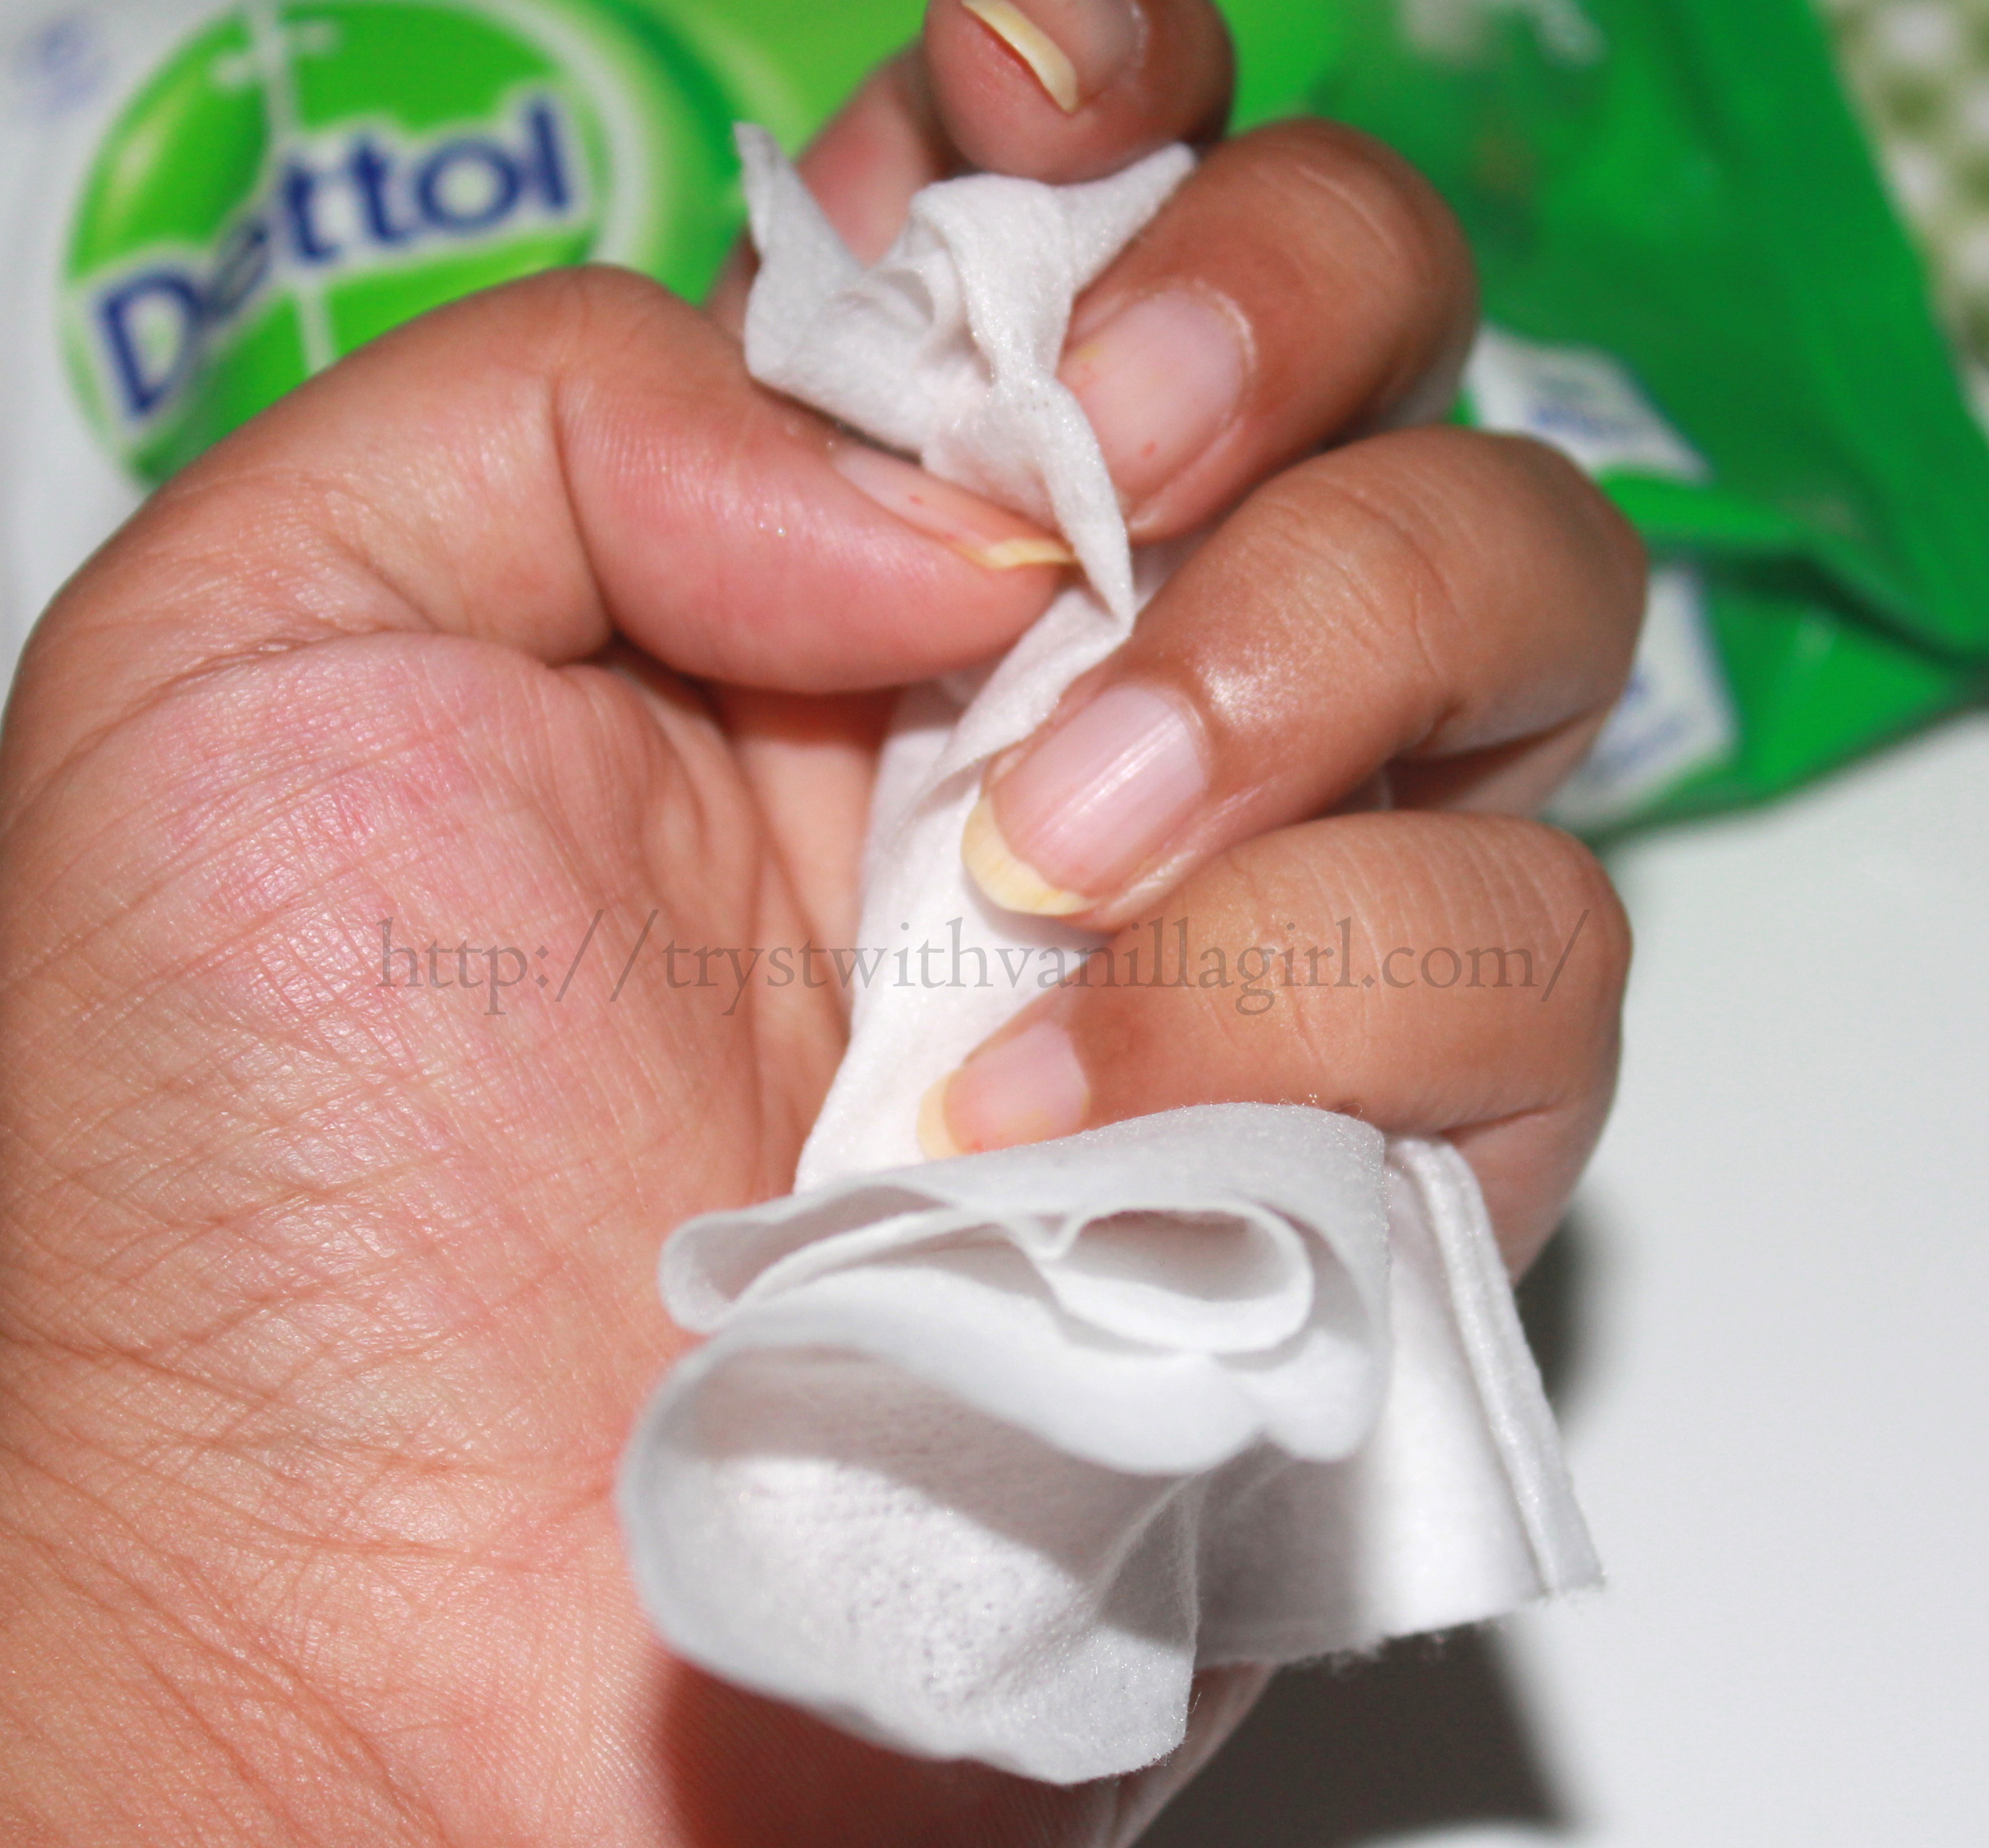 Dettol Multi Use Wipes Review,Price in India